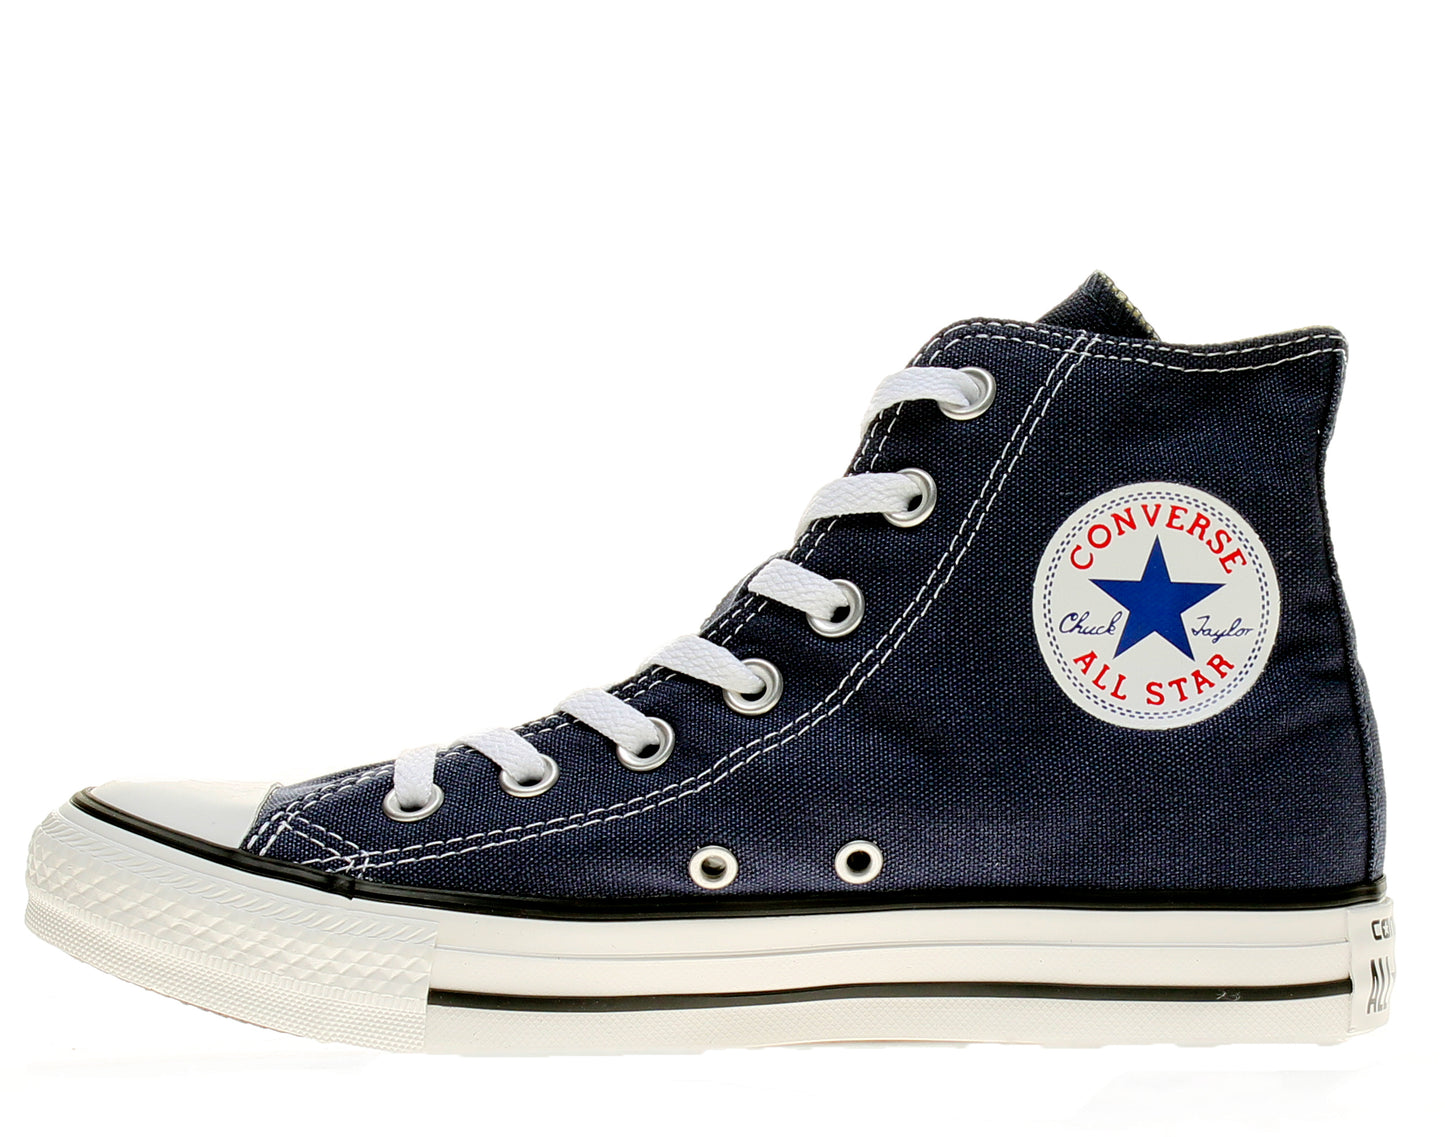 Converse Chuck Taylor All Star Navy High Top Sneakers M9622